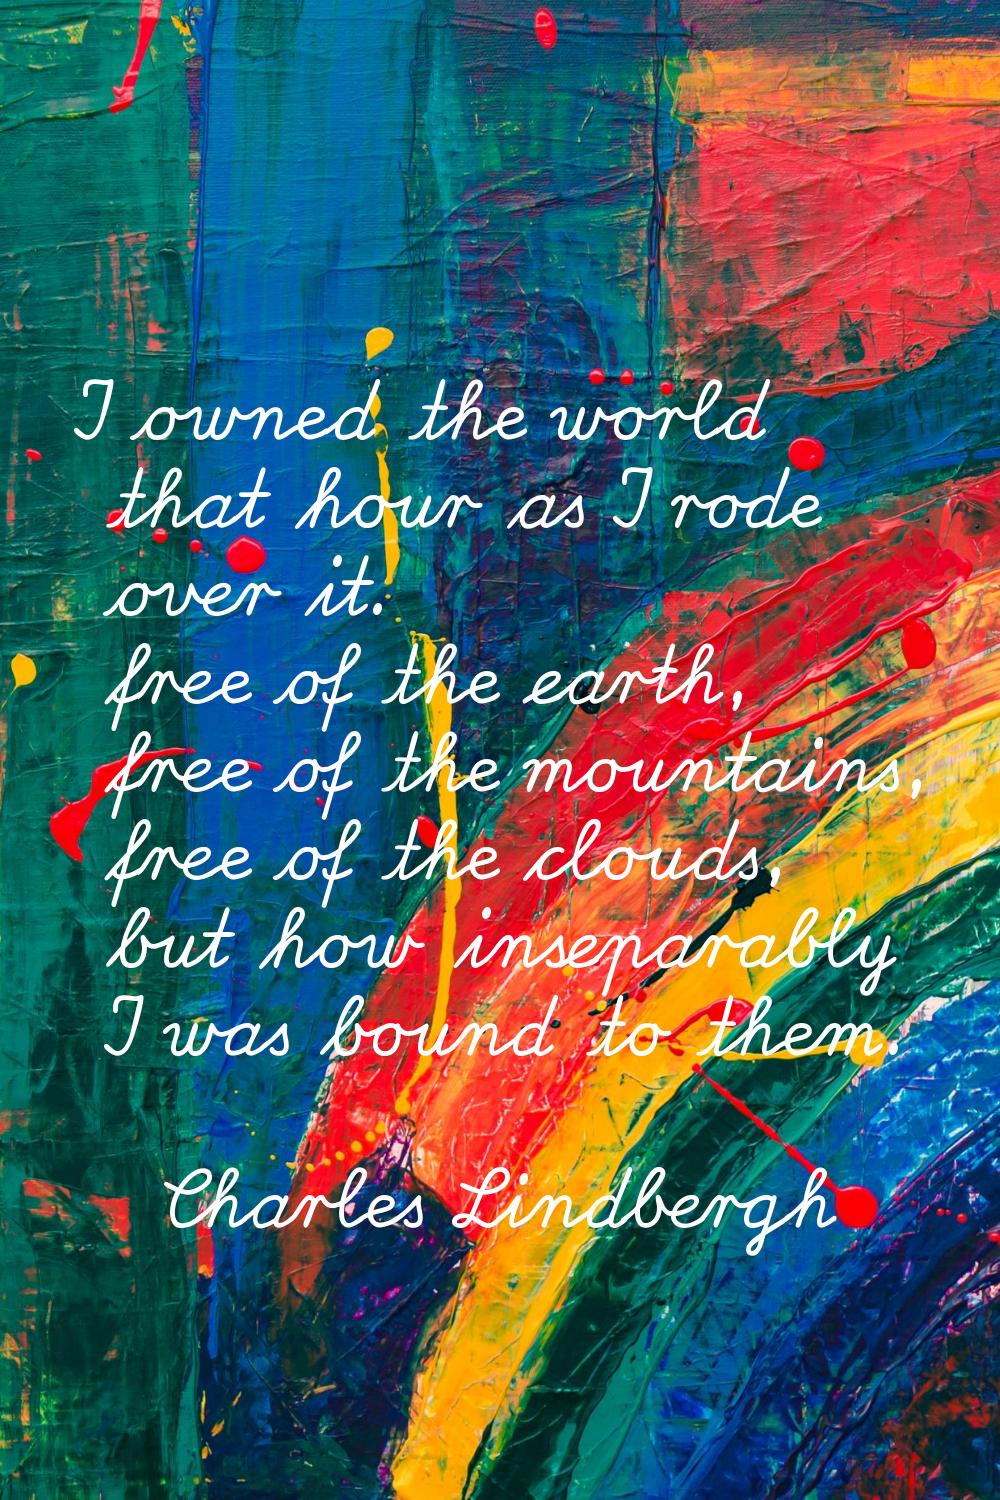 I owned the world that hour as I rode over it. free of the earth, free of the mountains, free of th